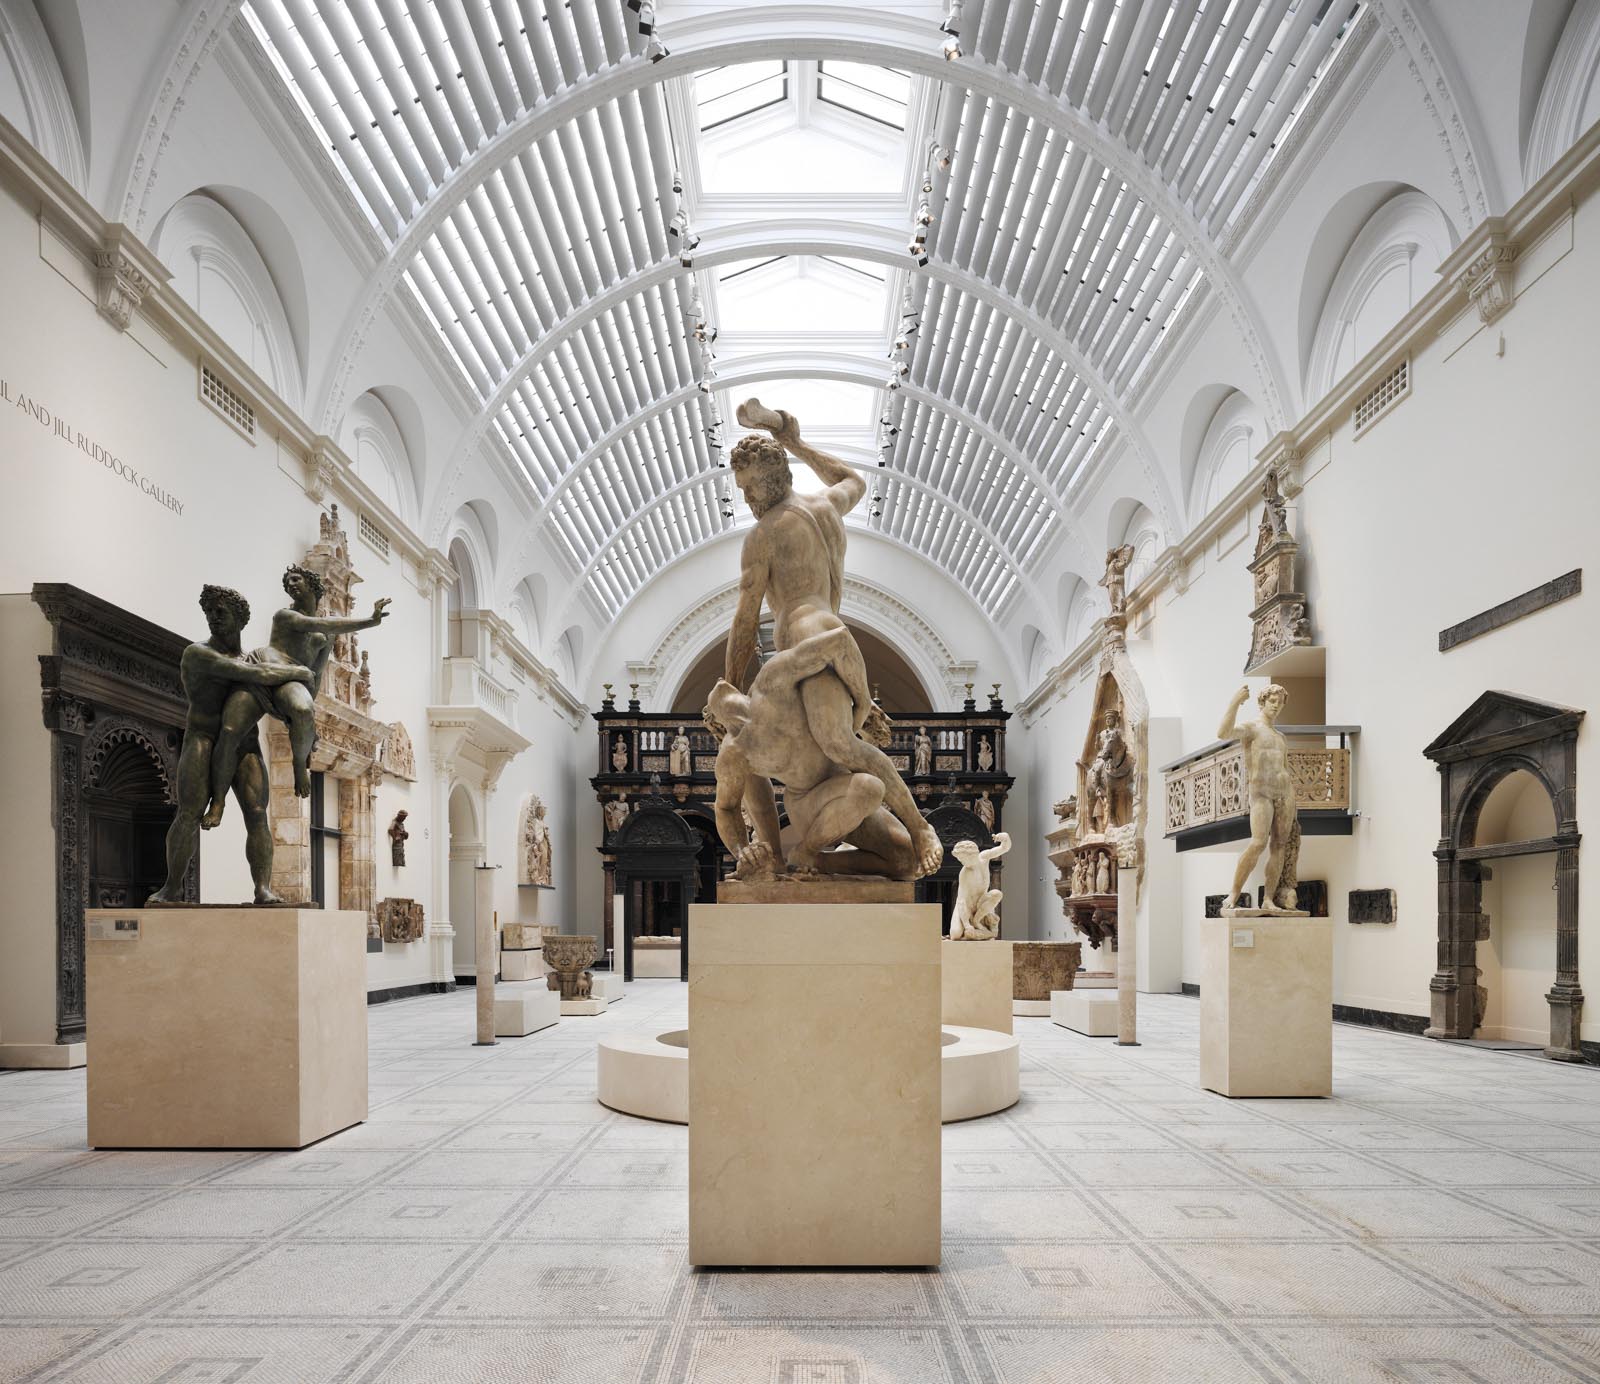 V&A Museumcredit: ©Victoria and Albert Museum, London